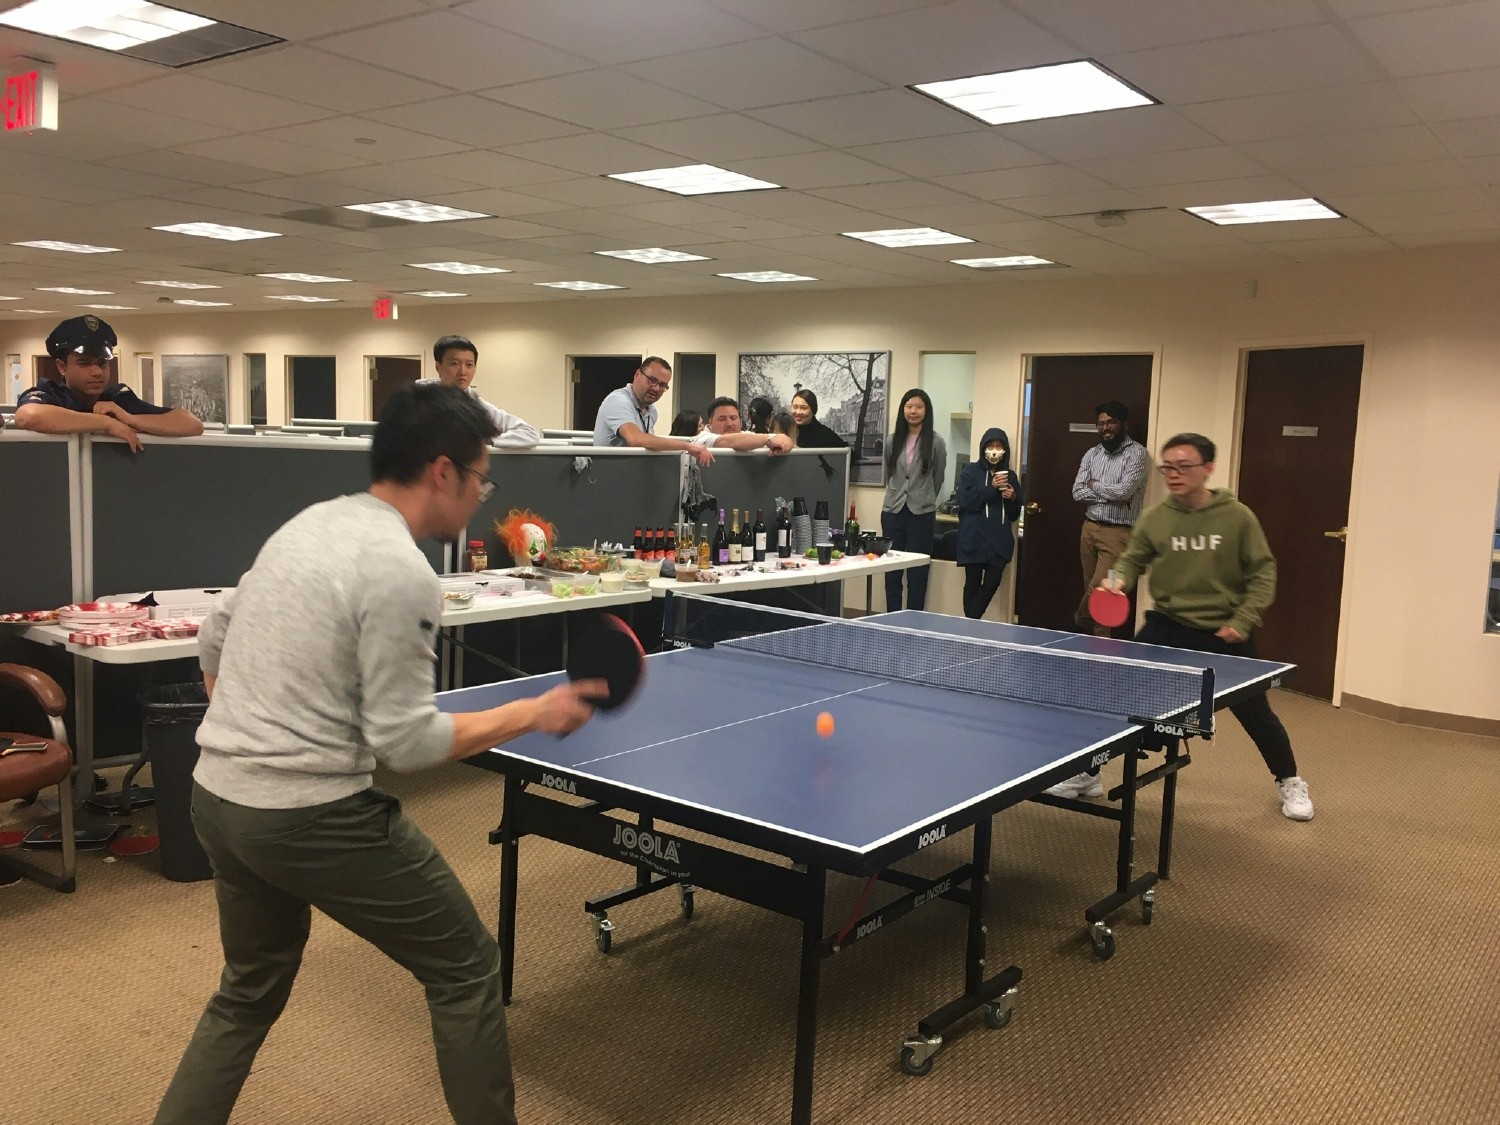 Friendly ping pong tournament!